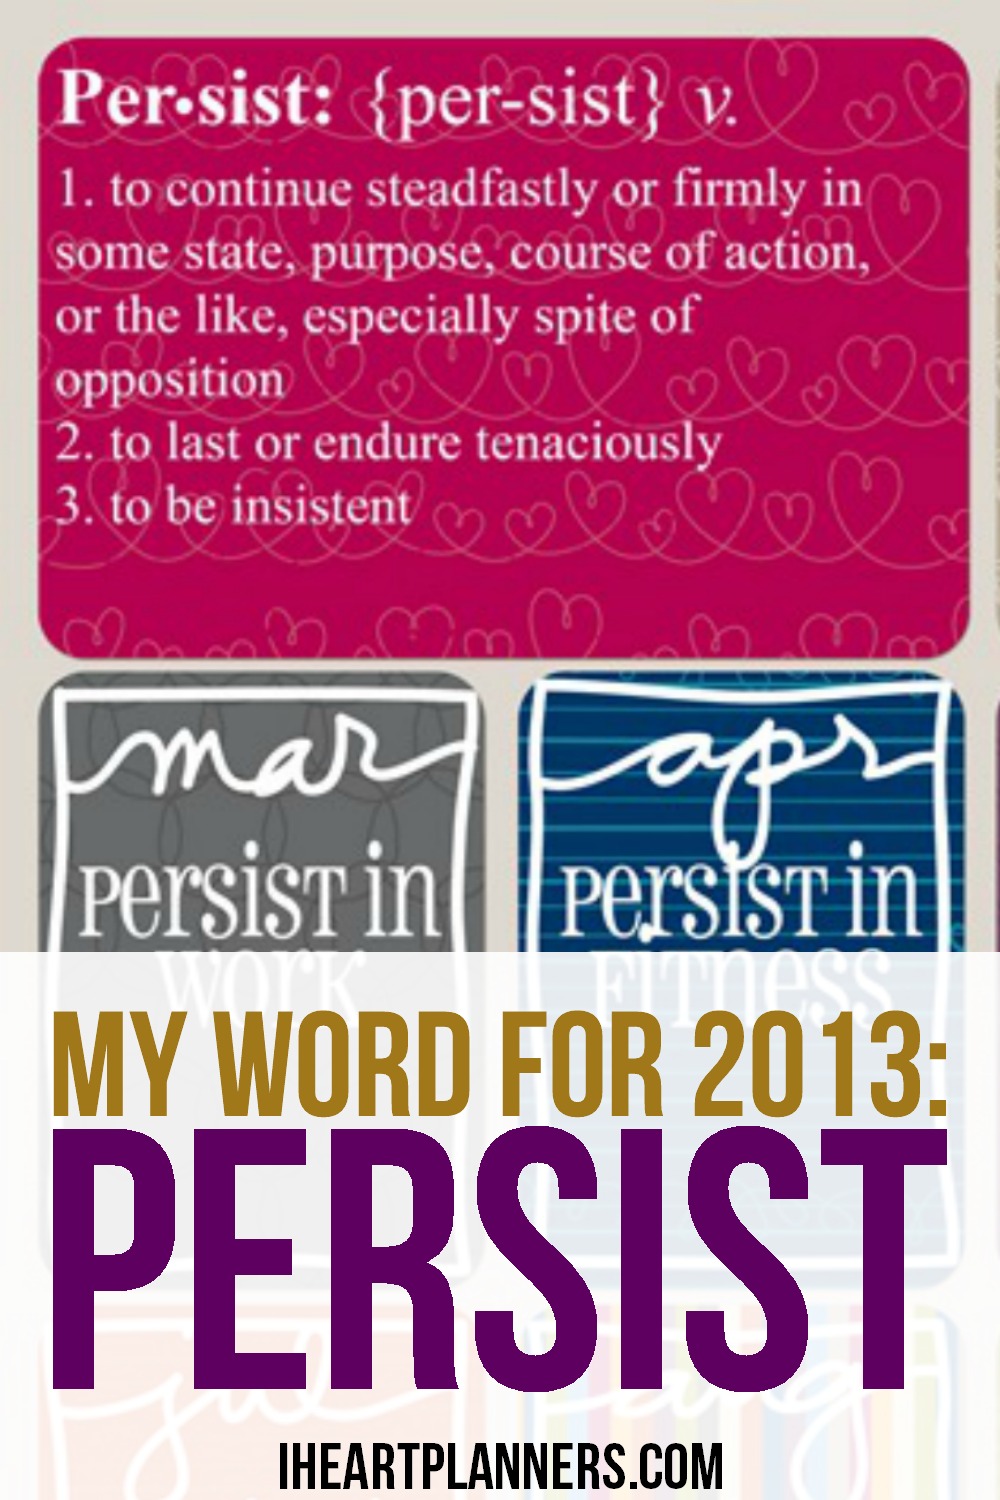 My word for 2013: Persist. I will focus on a different area of persistence in my life each month. Persistence is my resolution for 2013.